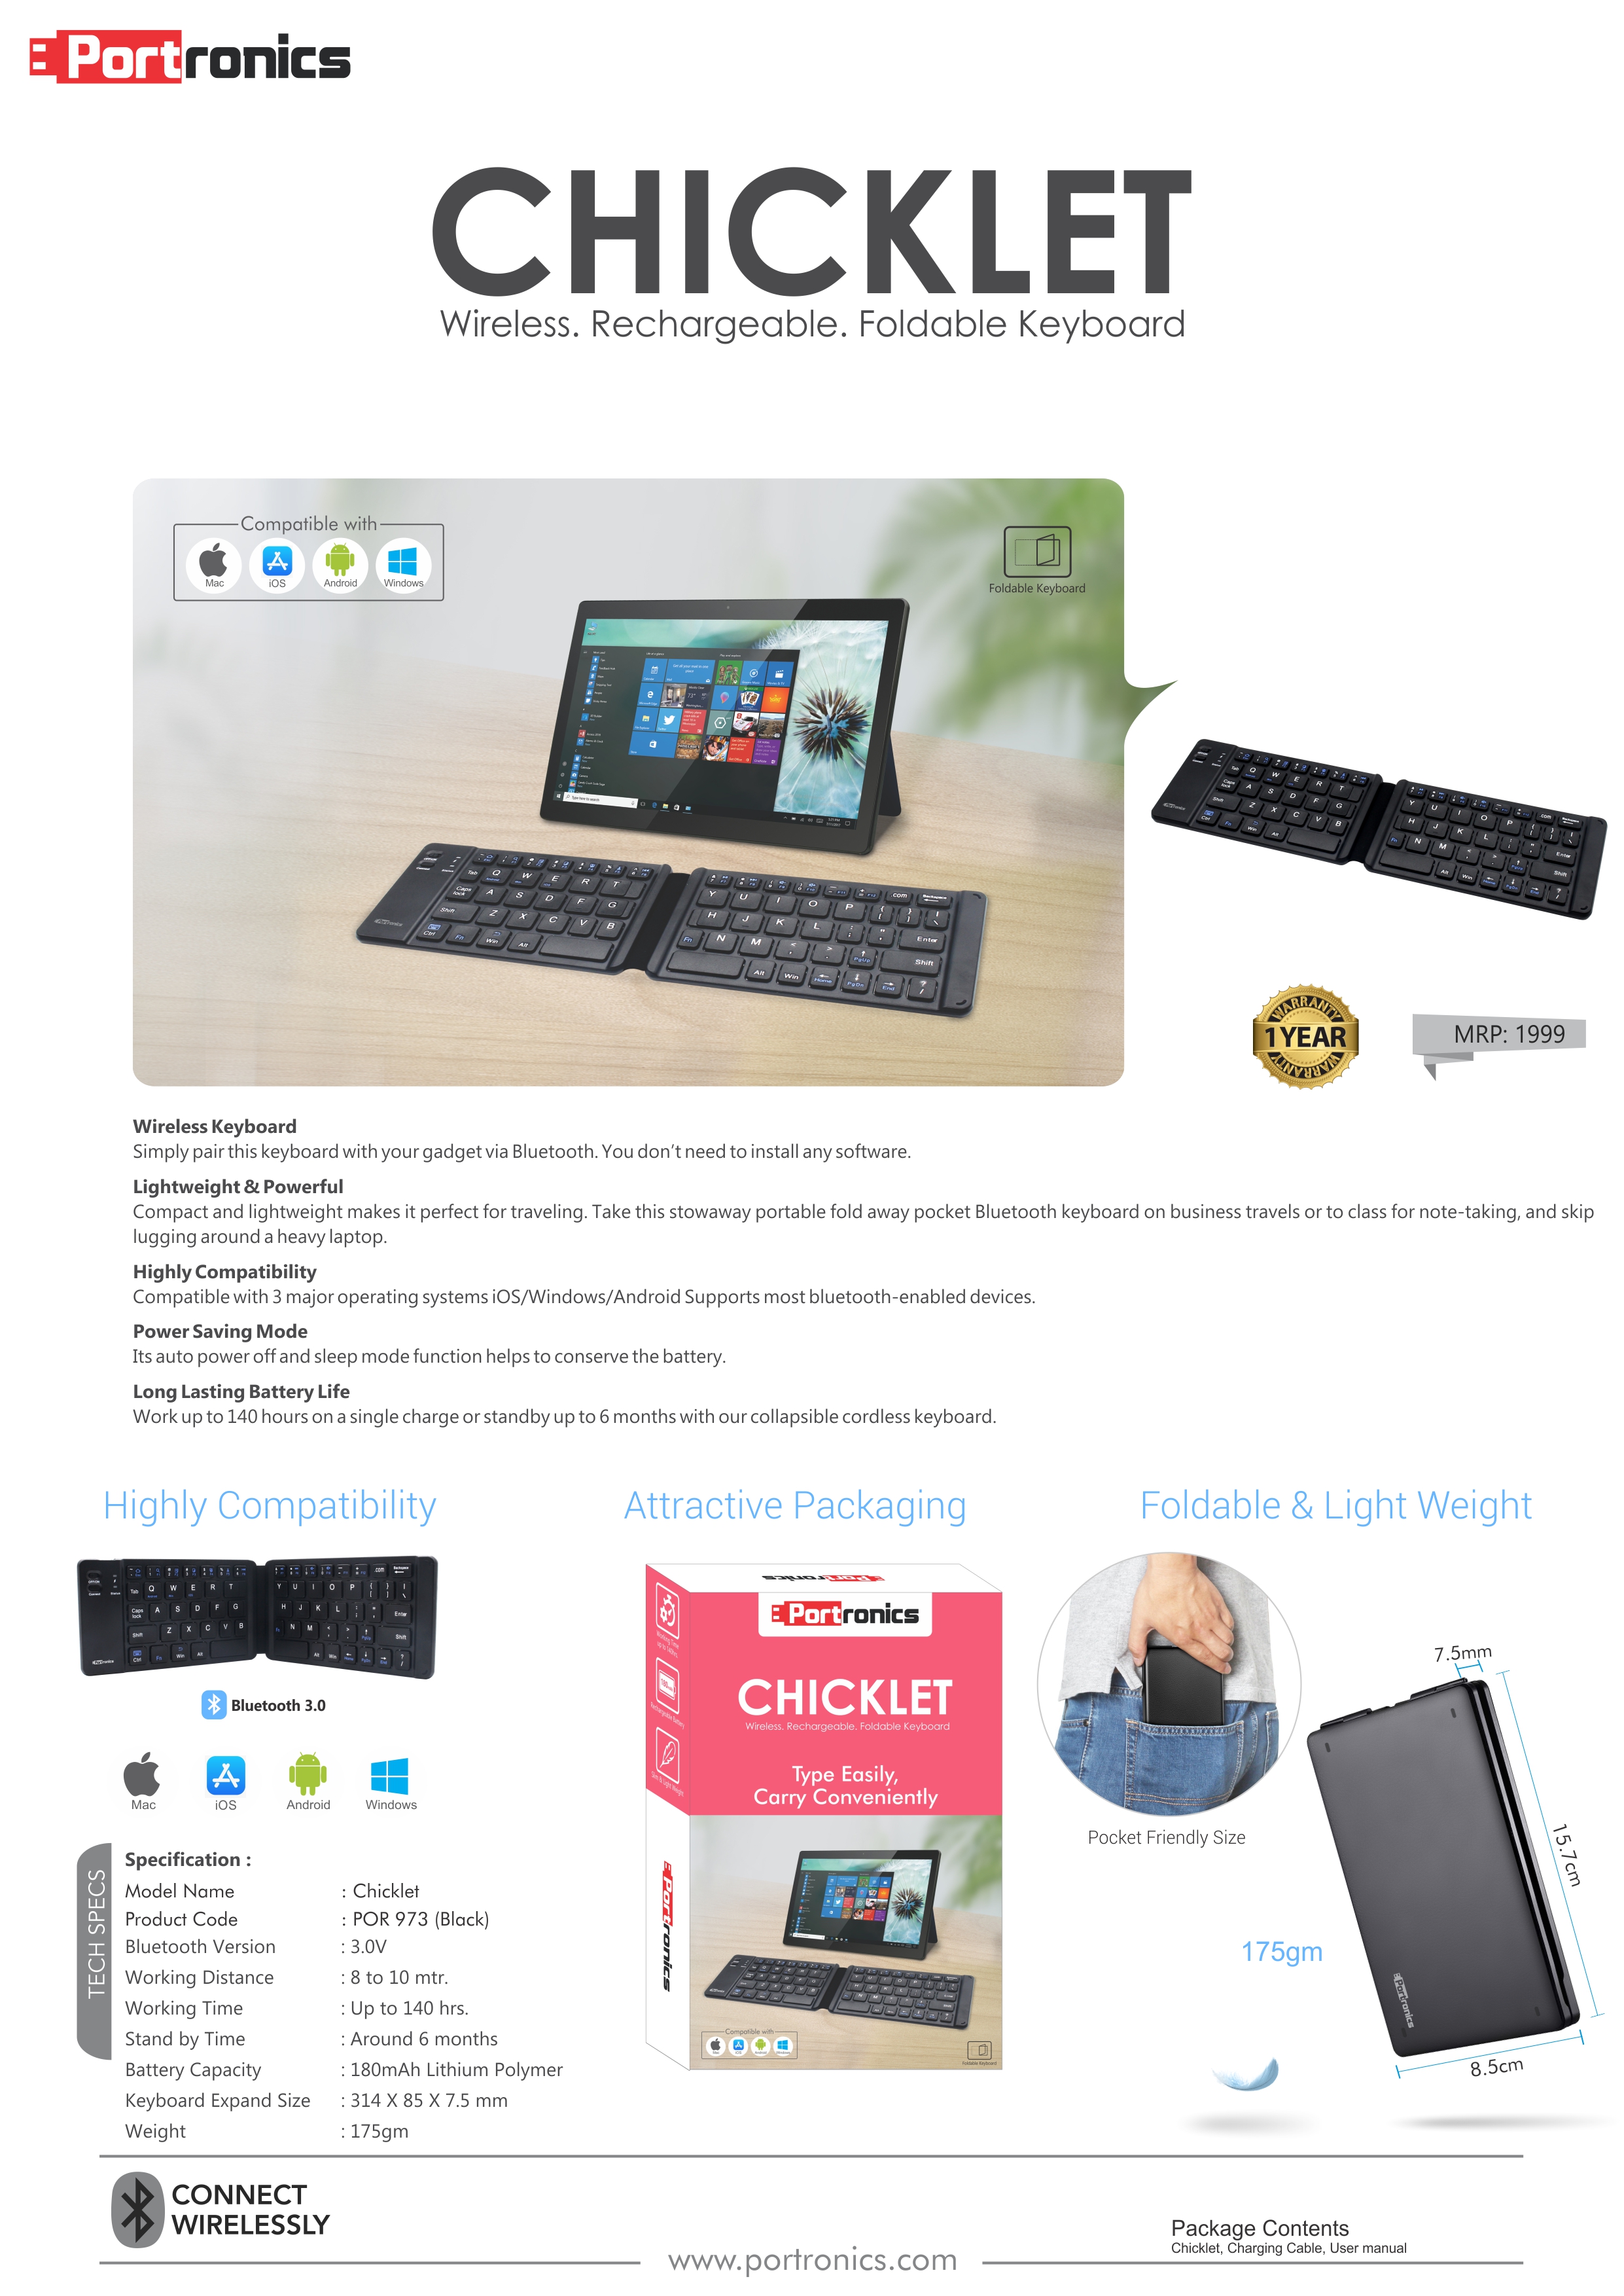 Portronics Chicklet-Wireless  Rechargeable Foldable Keyboard